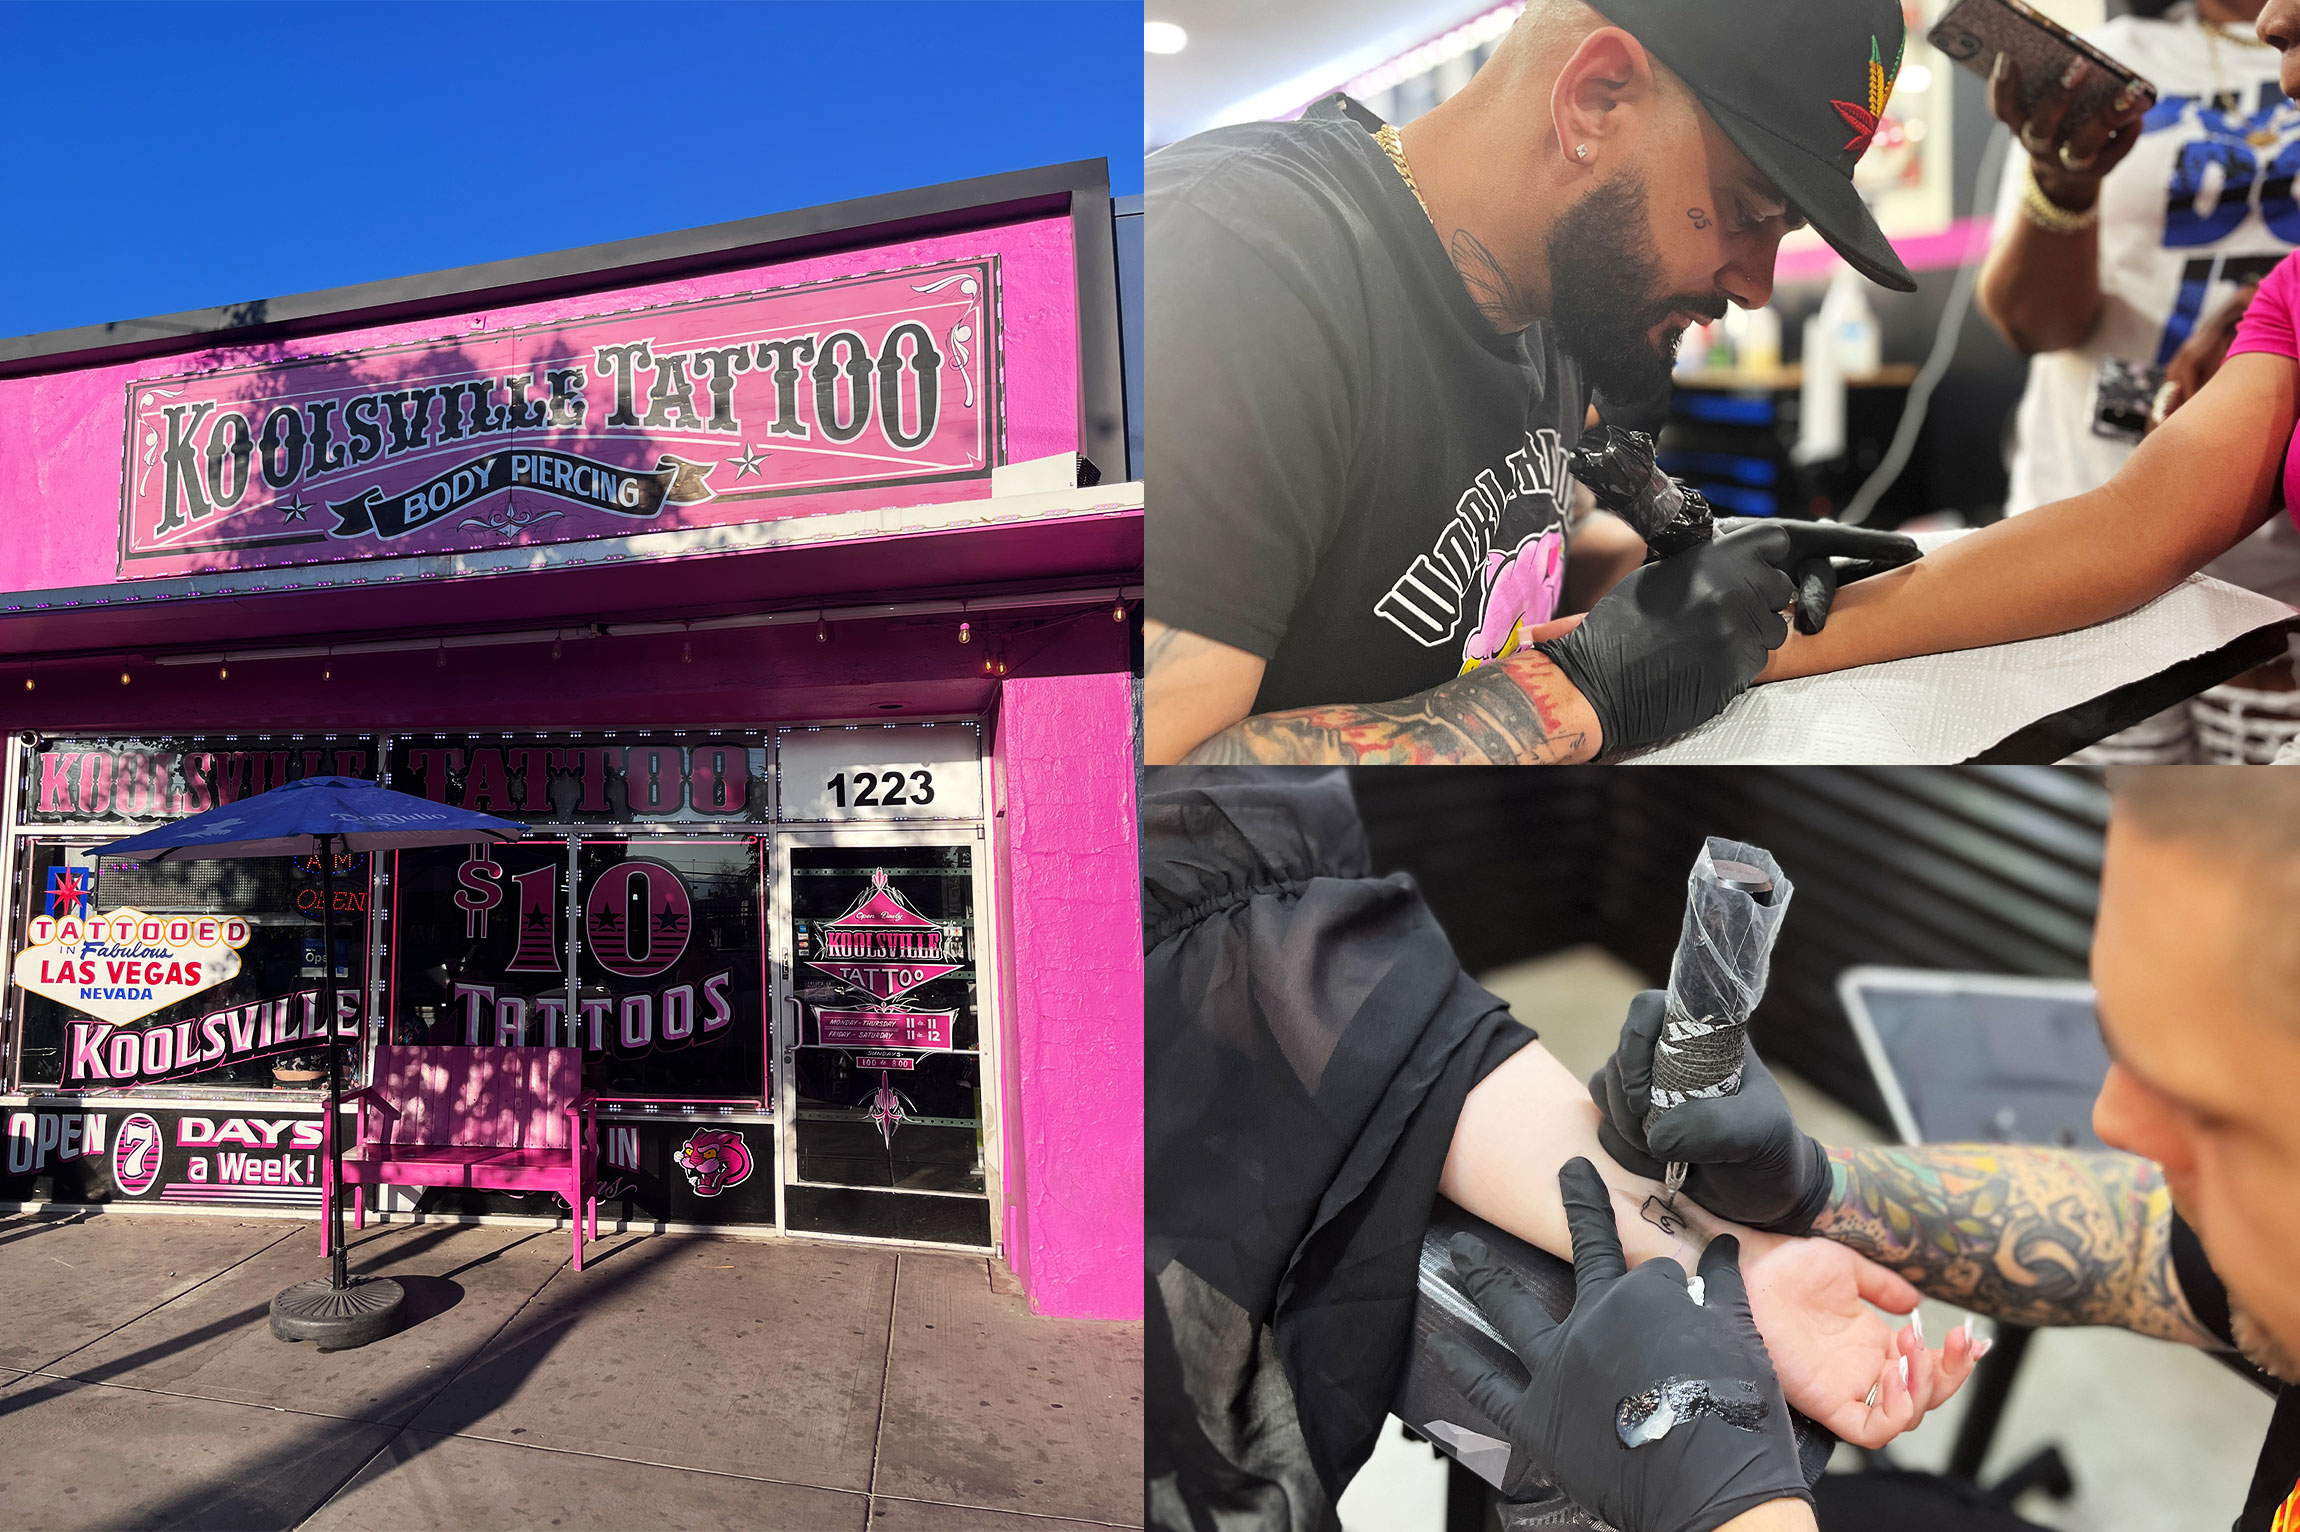 The Best Tattoo Shop at Caesars Palace